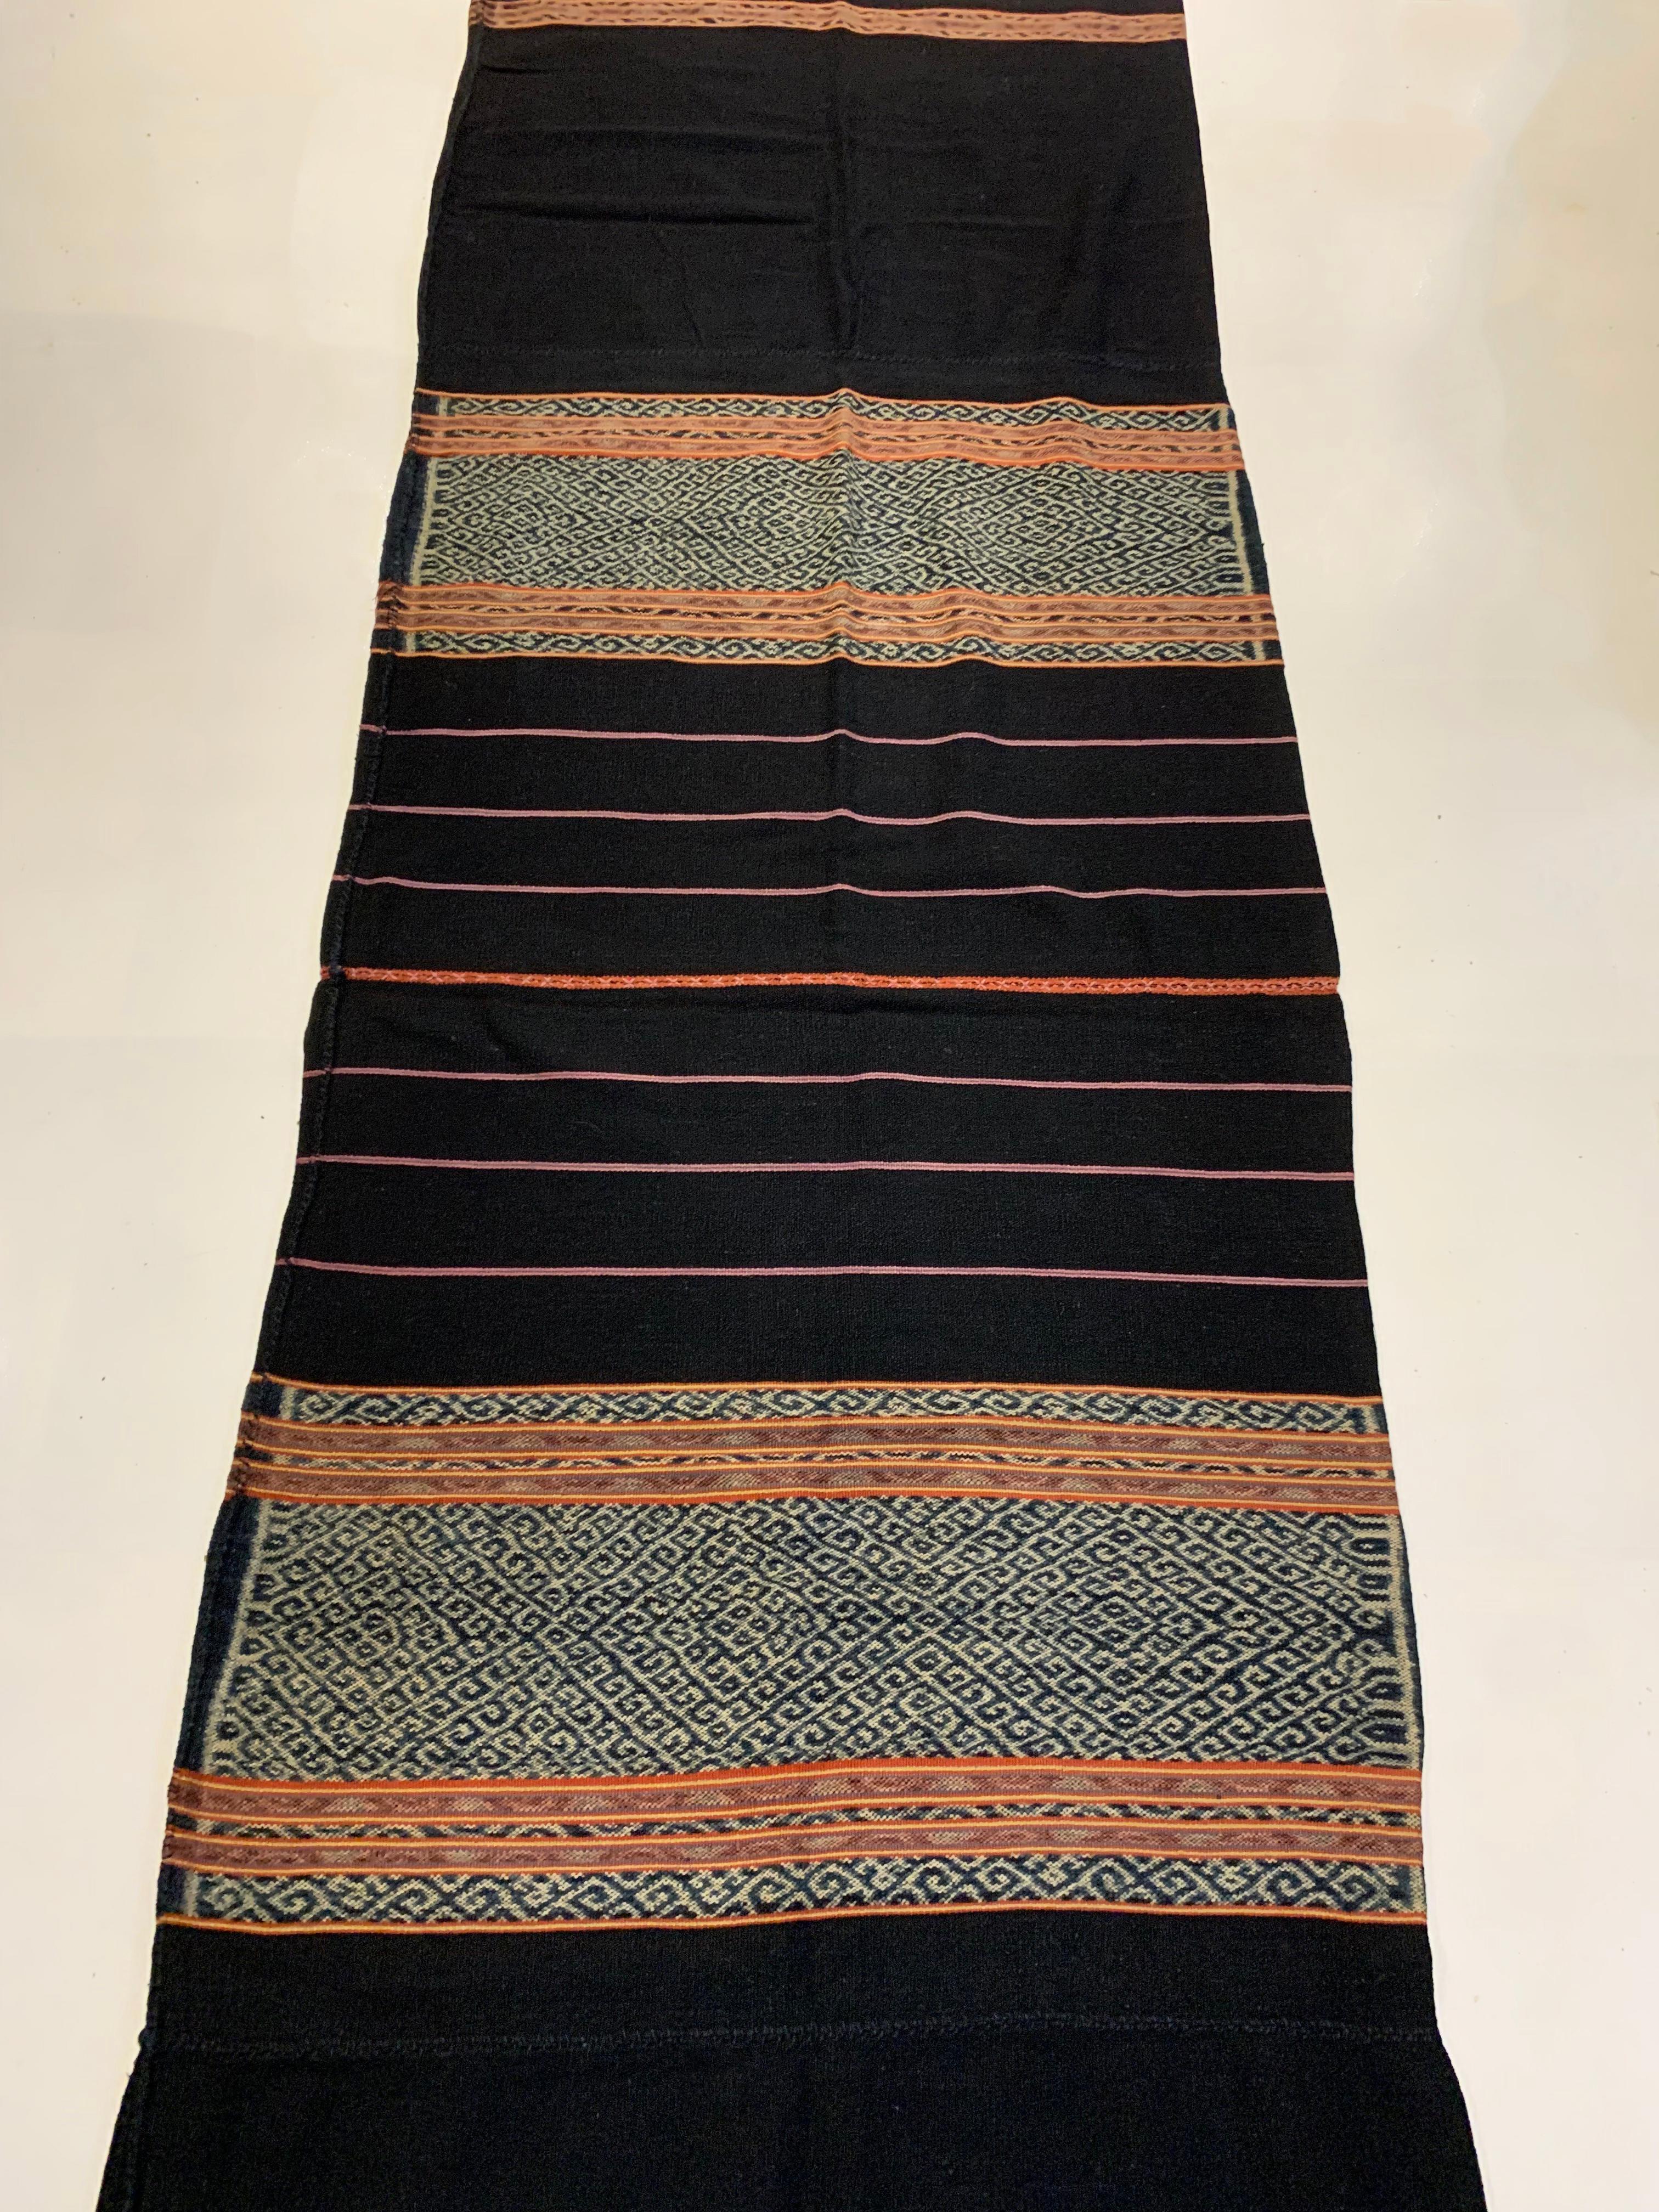 This Ikat textile originates from the Island of Timor, Indonesia. It is hand-woven using naturally dyed yarns via a method passed on through generations. The dark background brings to life the array of coloured detailing and distinct tribal